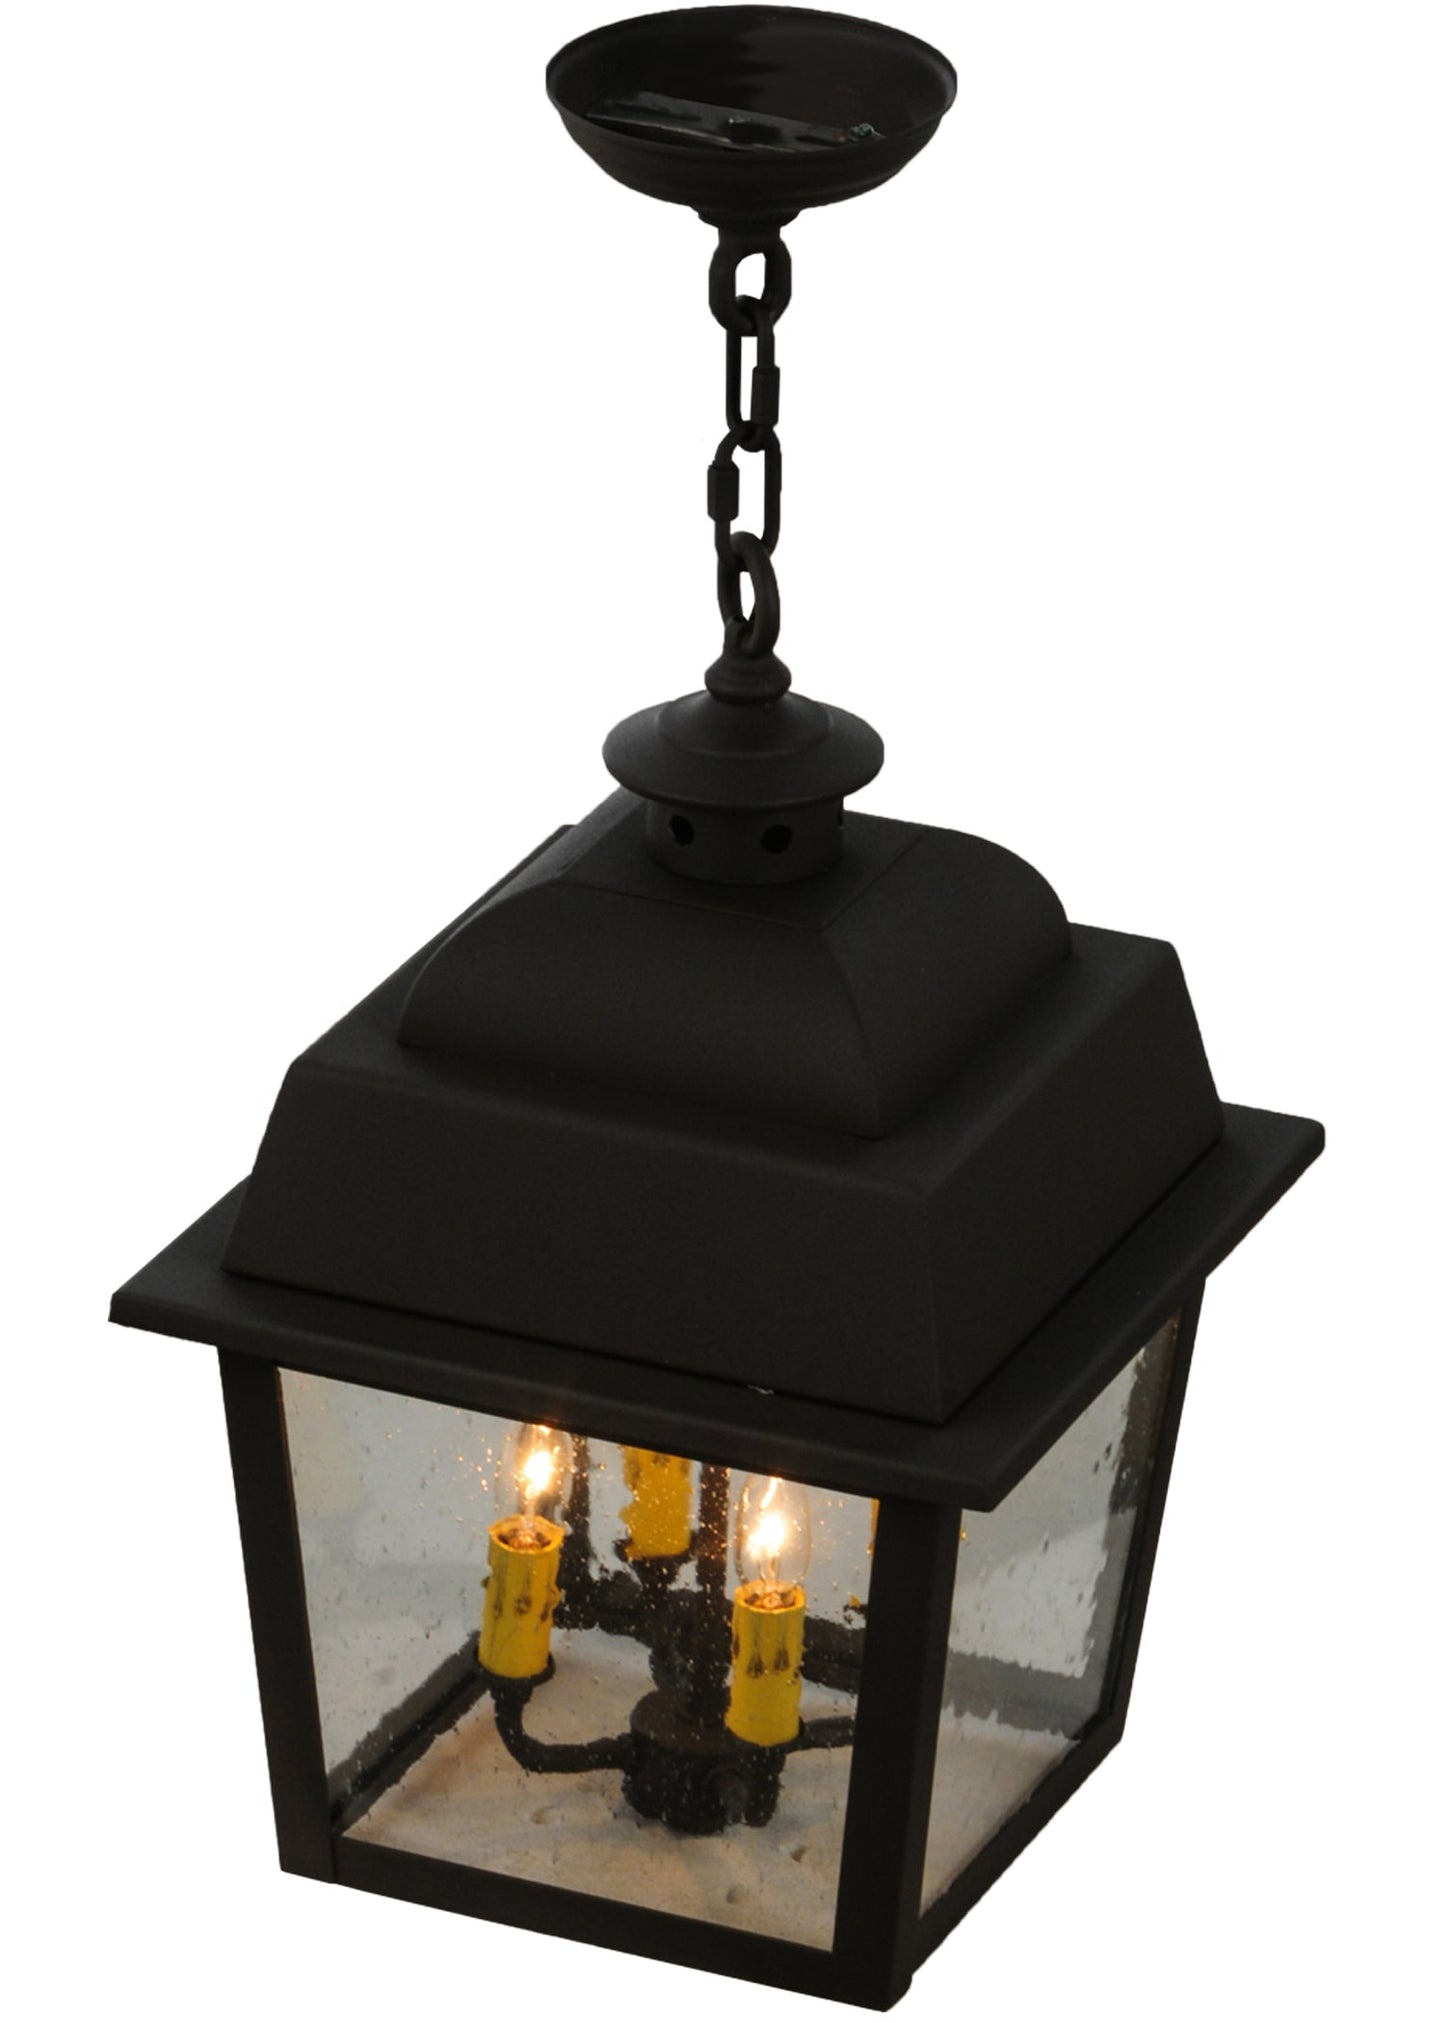 12" Square Stockwell Hanging Lantern Pendant by 2nd Ave Lighting